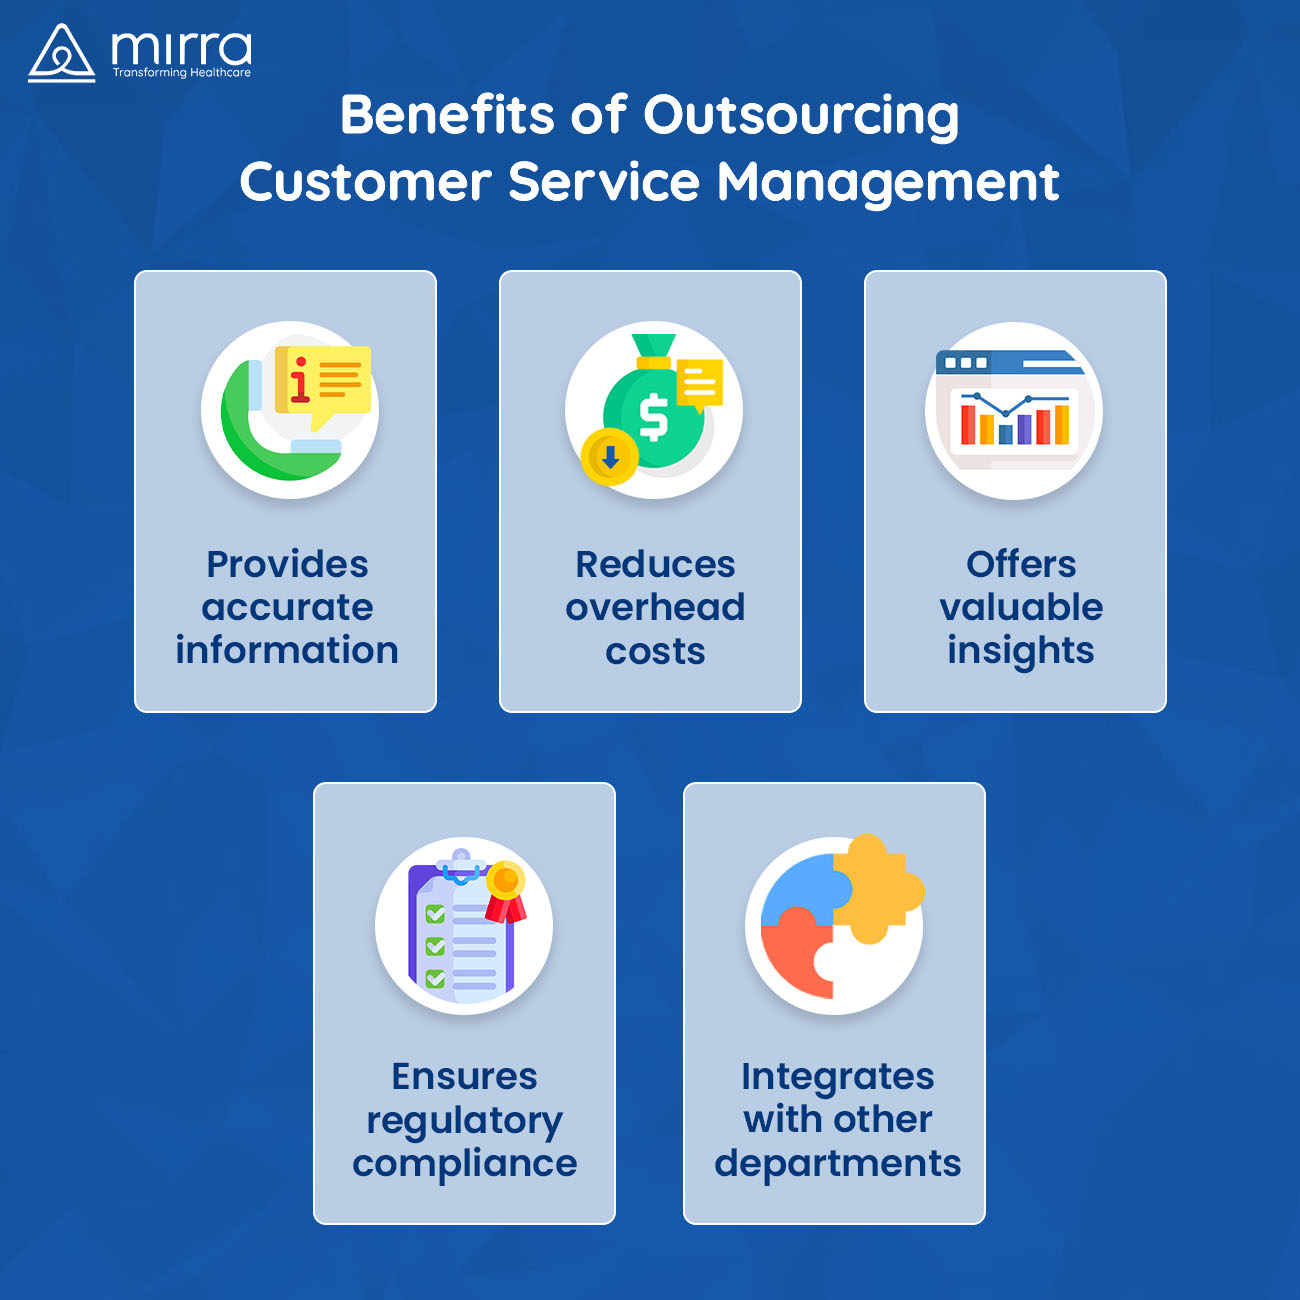 Benefits of Outsourcing Customer Service Management